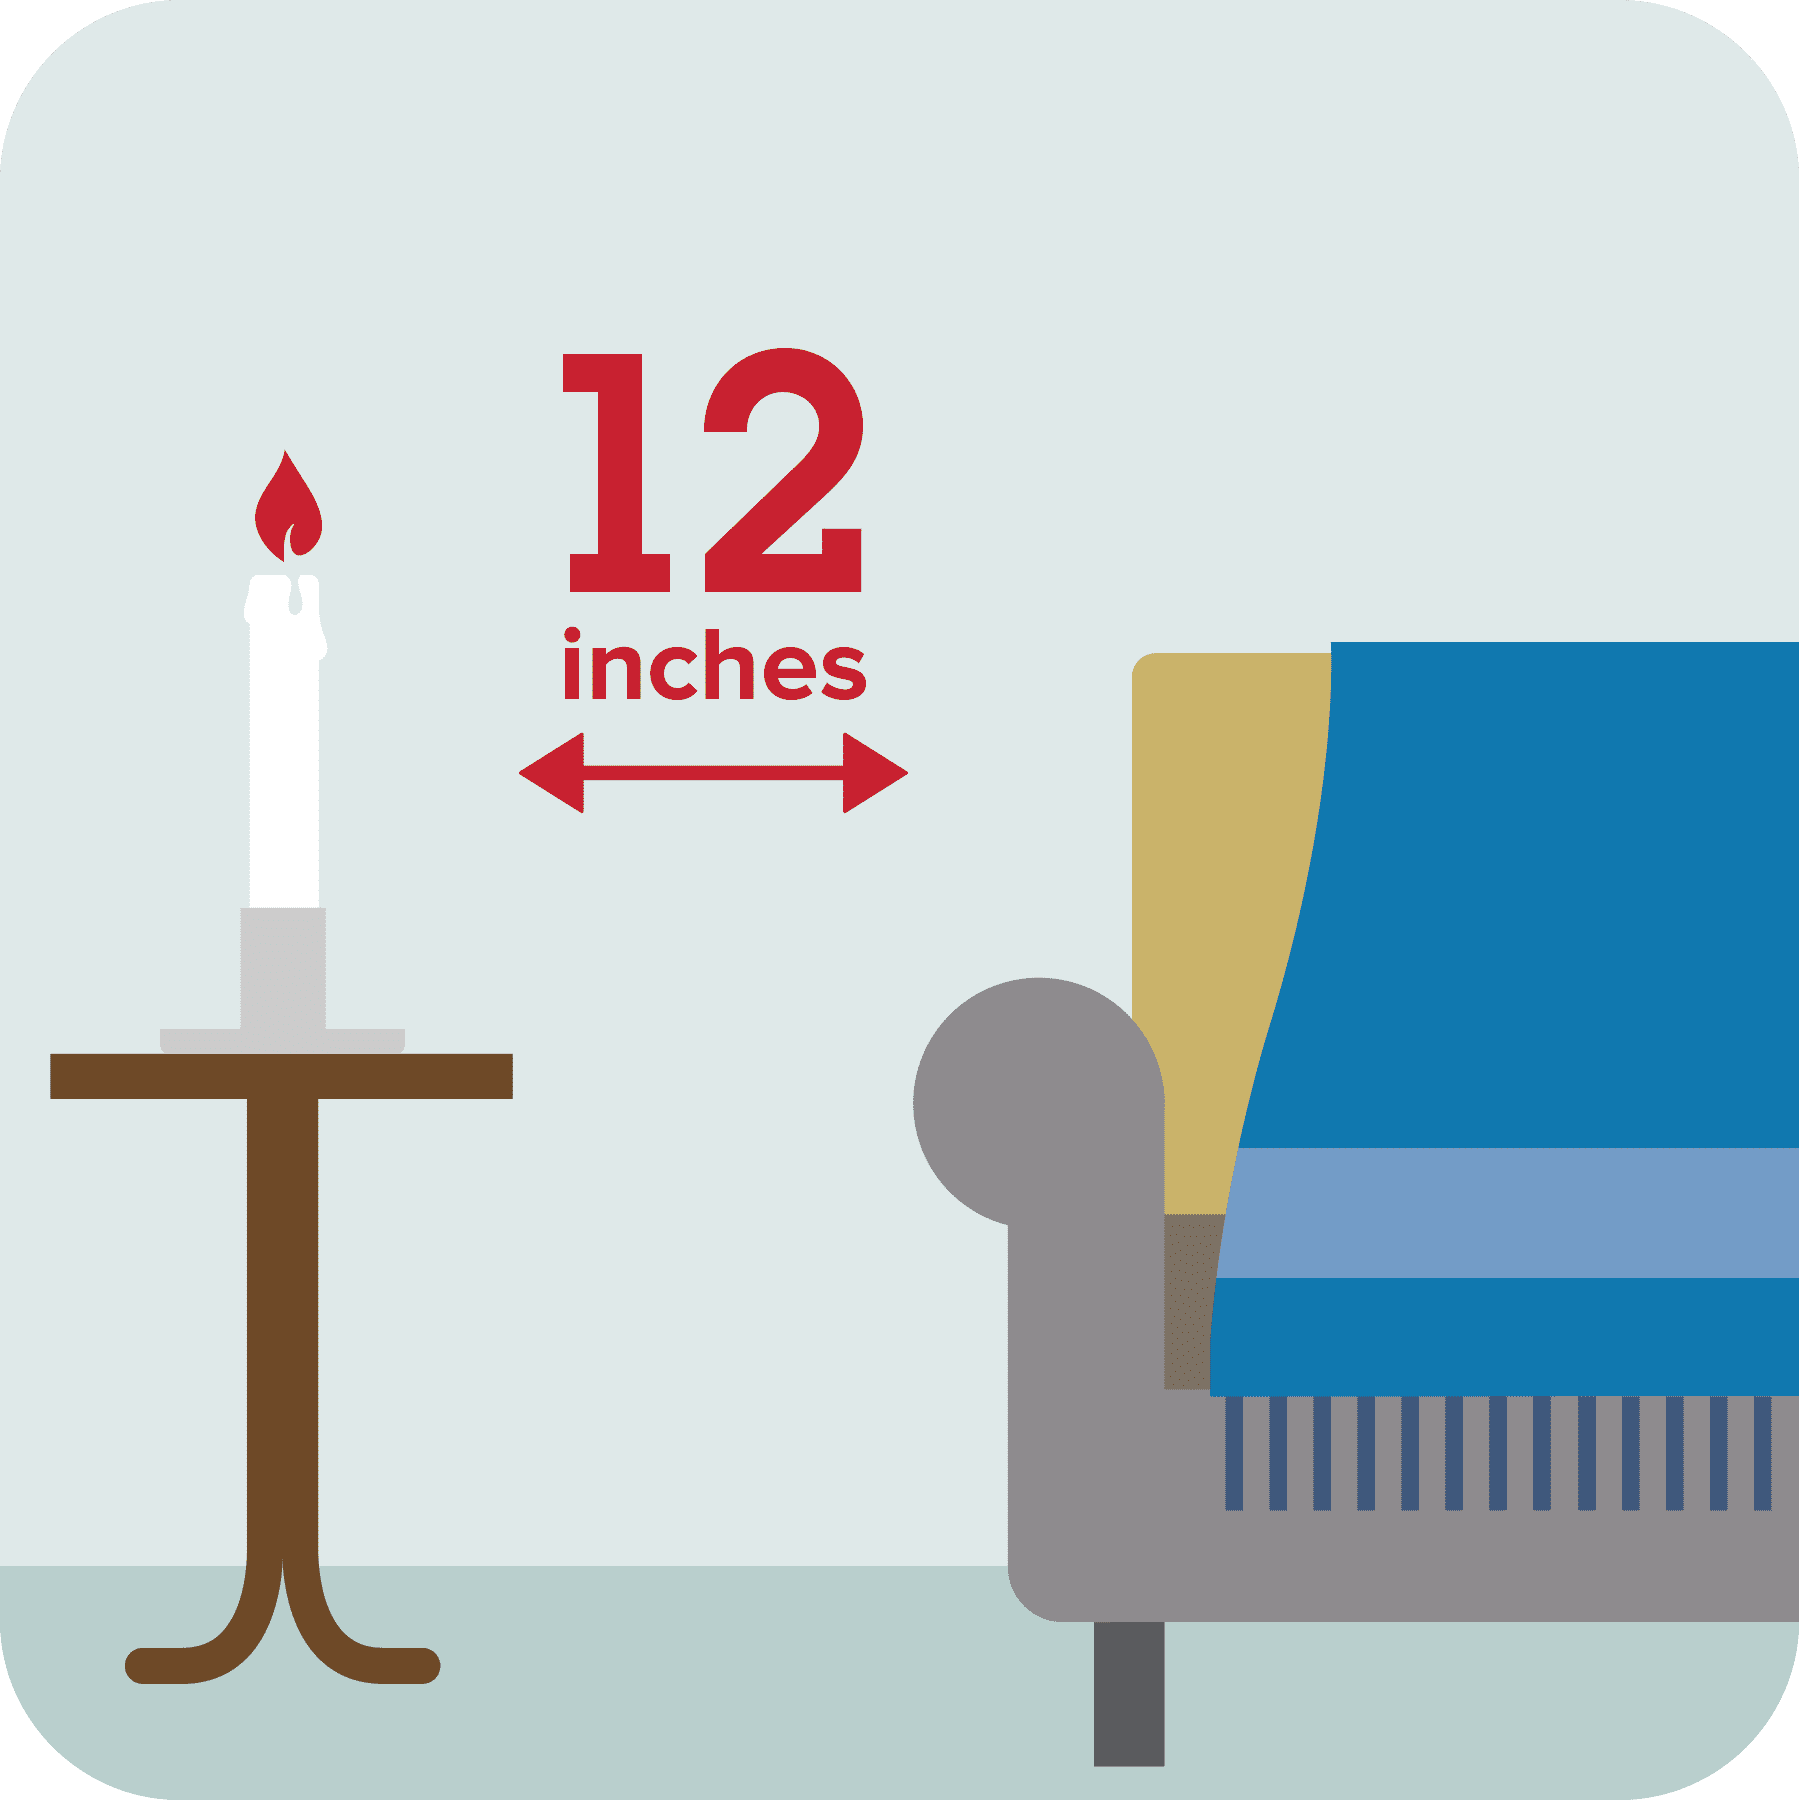 A candle 12 inches away from a couch.